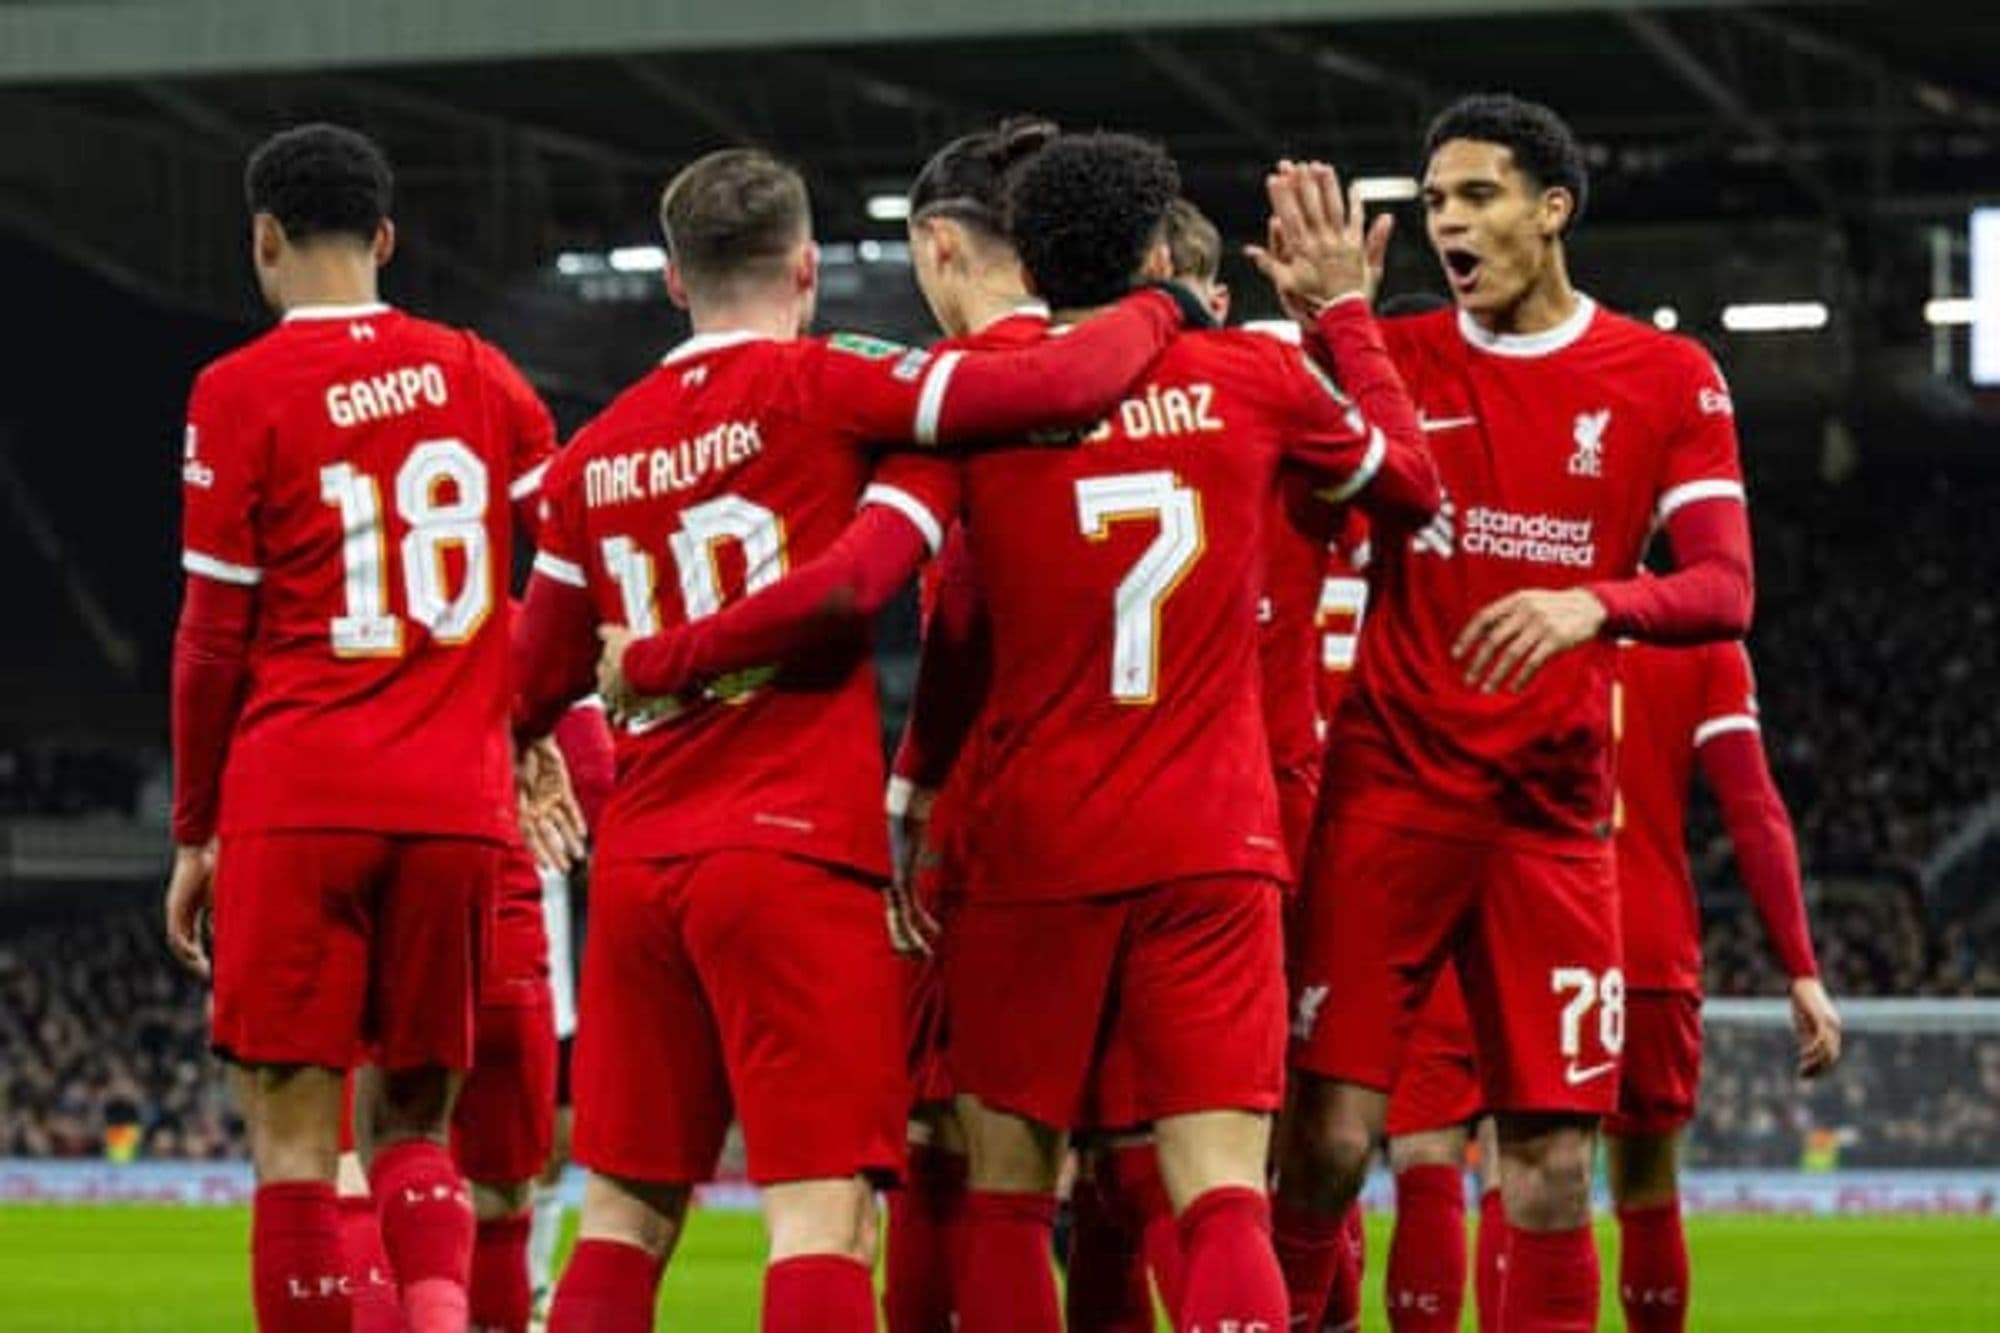 # Title: Liverpool's Premier League Title Pursuit Intensifies with Victory over Fulham